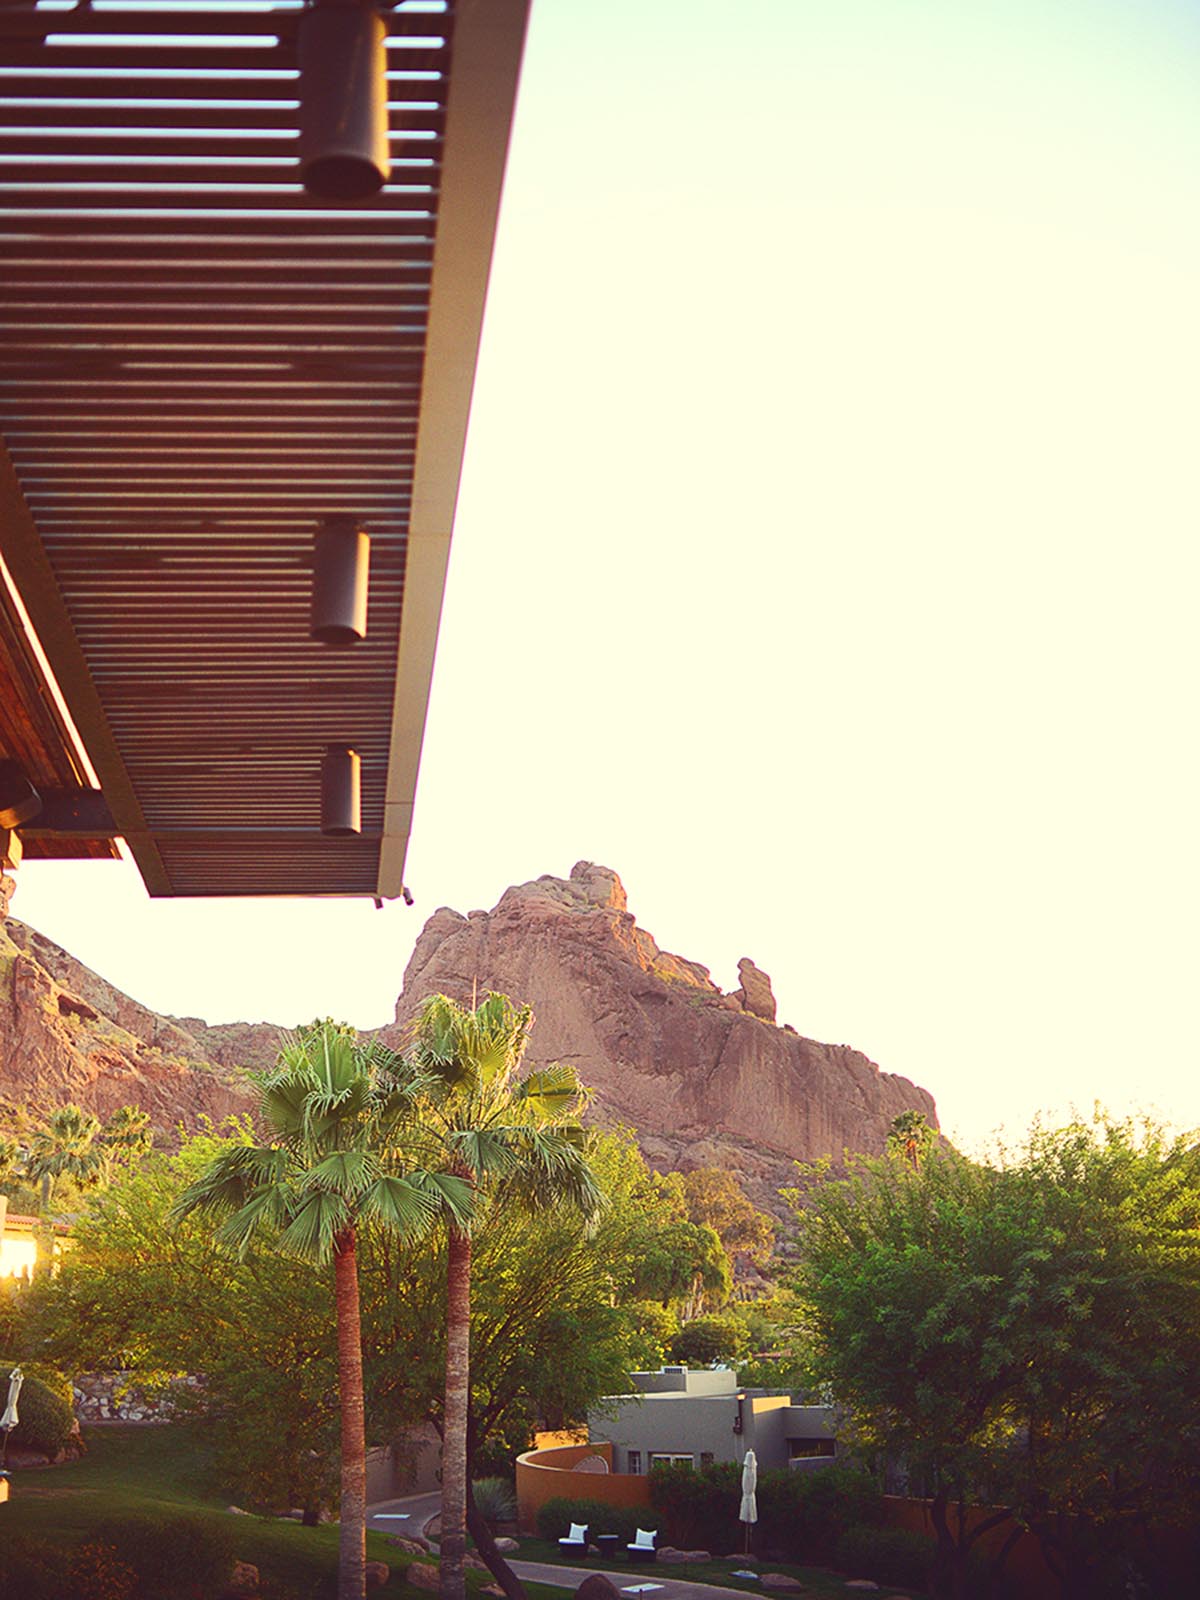 The view of camelback mountain.